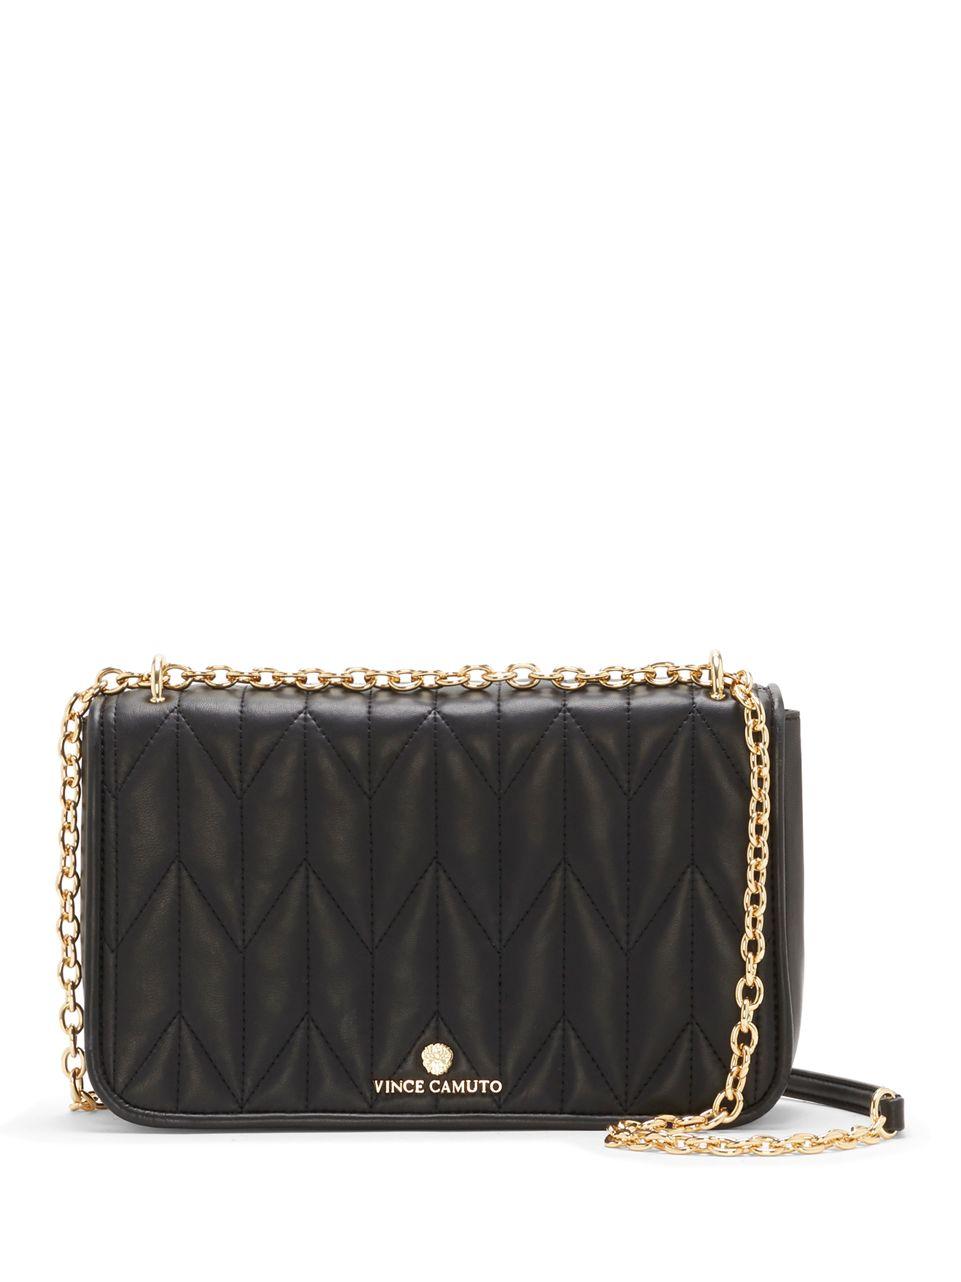 Lyst - Vince Camuto Quilted Crossbody Clutch in Black